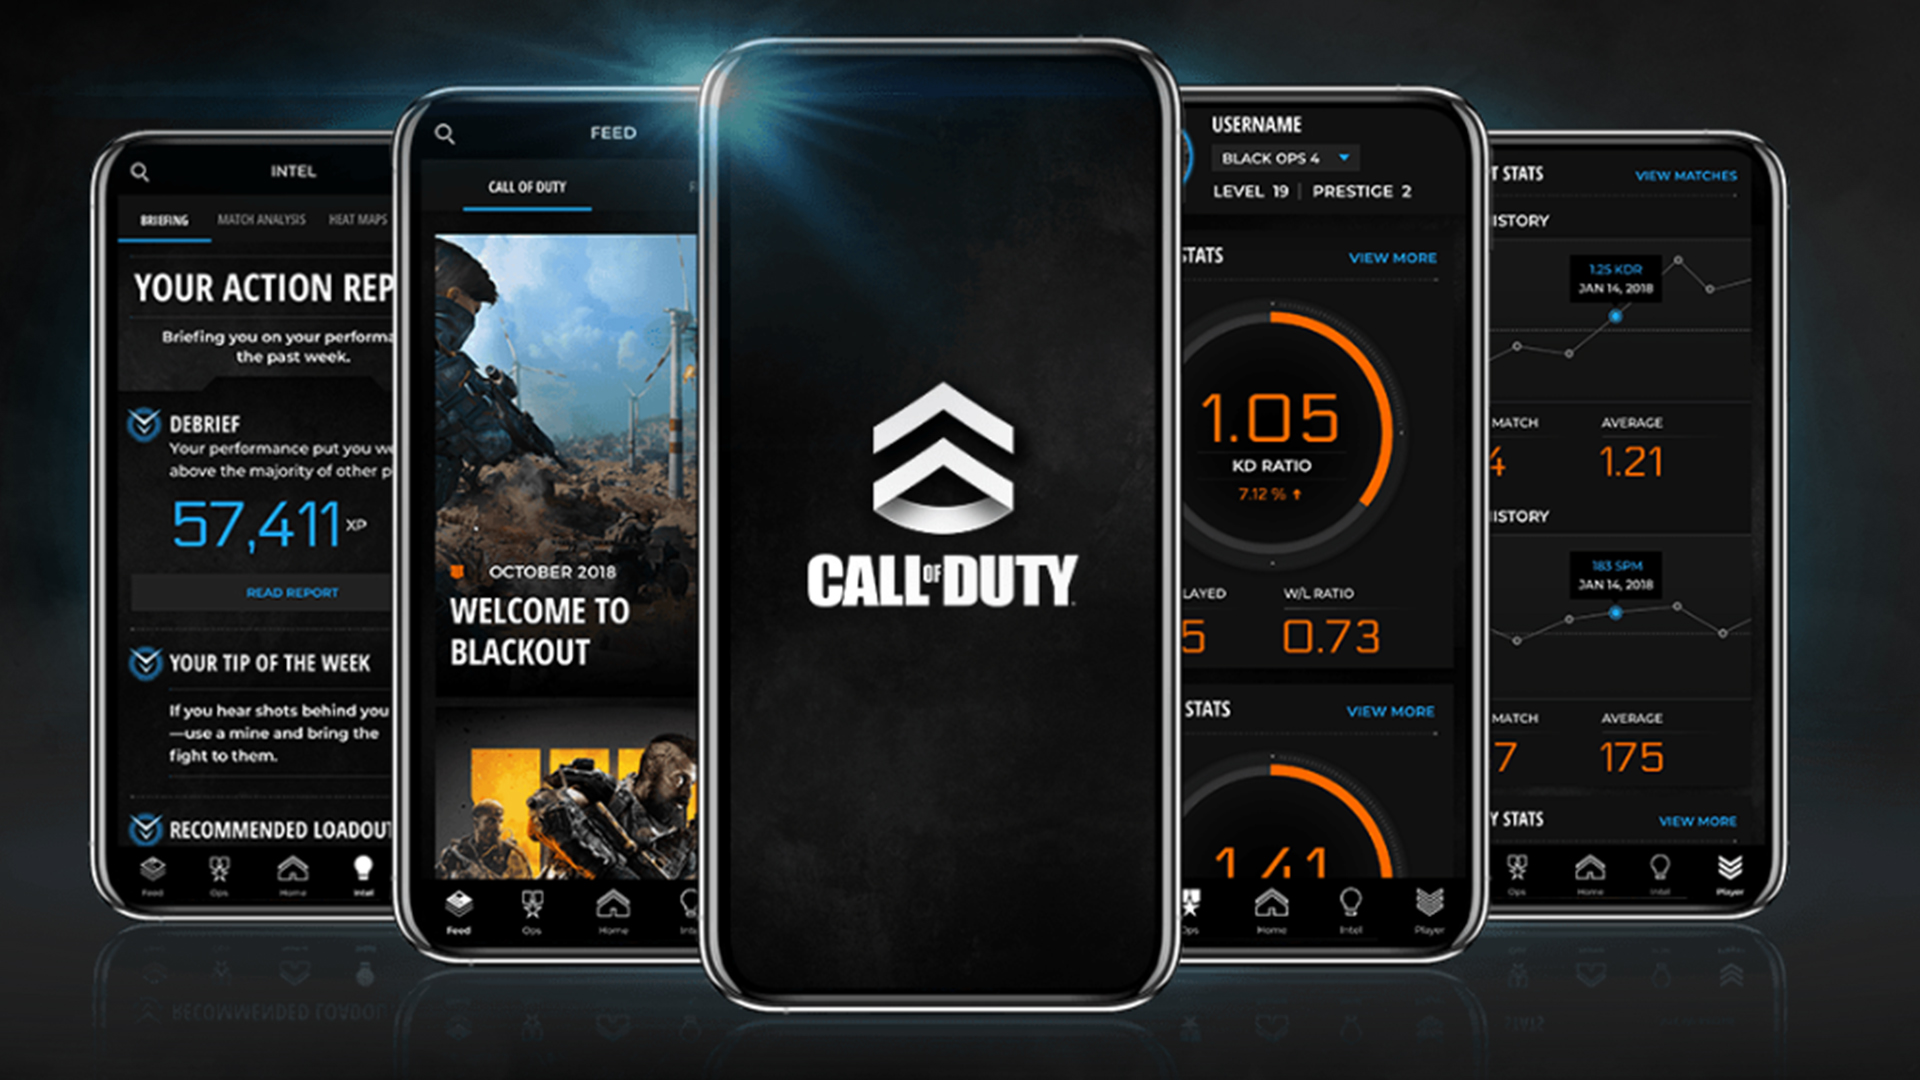 Black Ops 4 app is out now, giving you free COD Points and ... - 